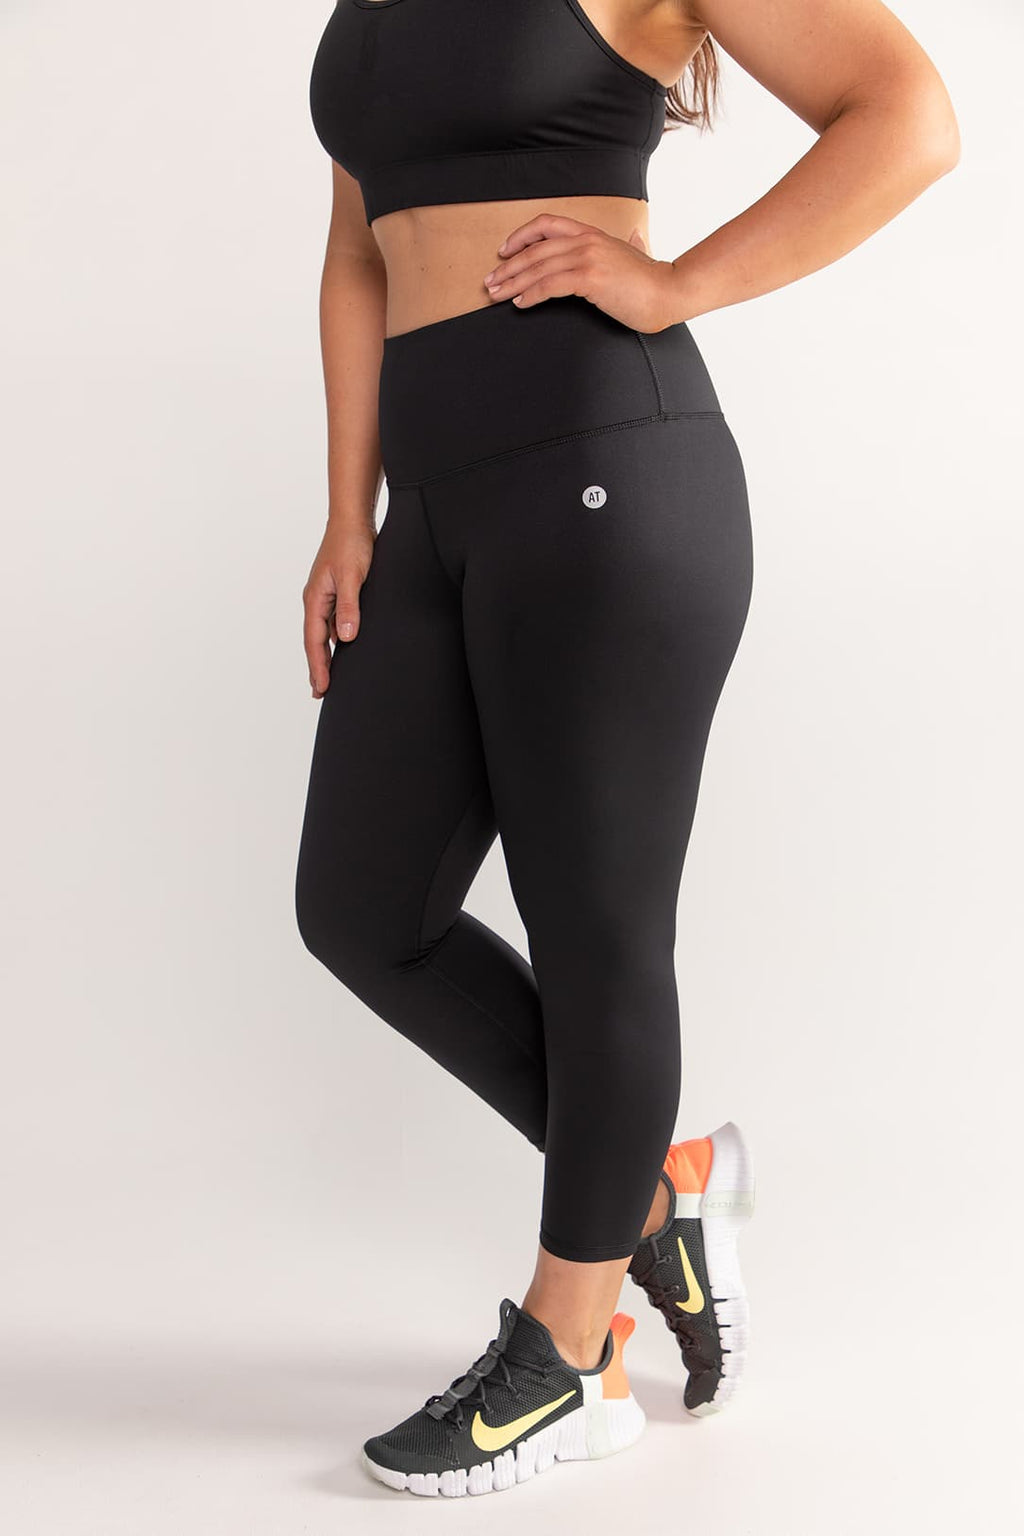 Essential 7/8 Length Tight - Black from Active Truth™
